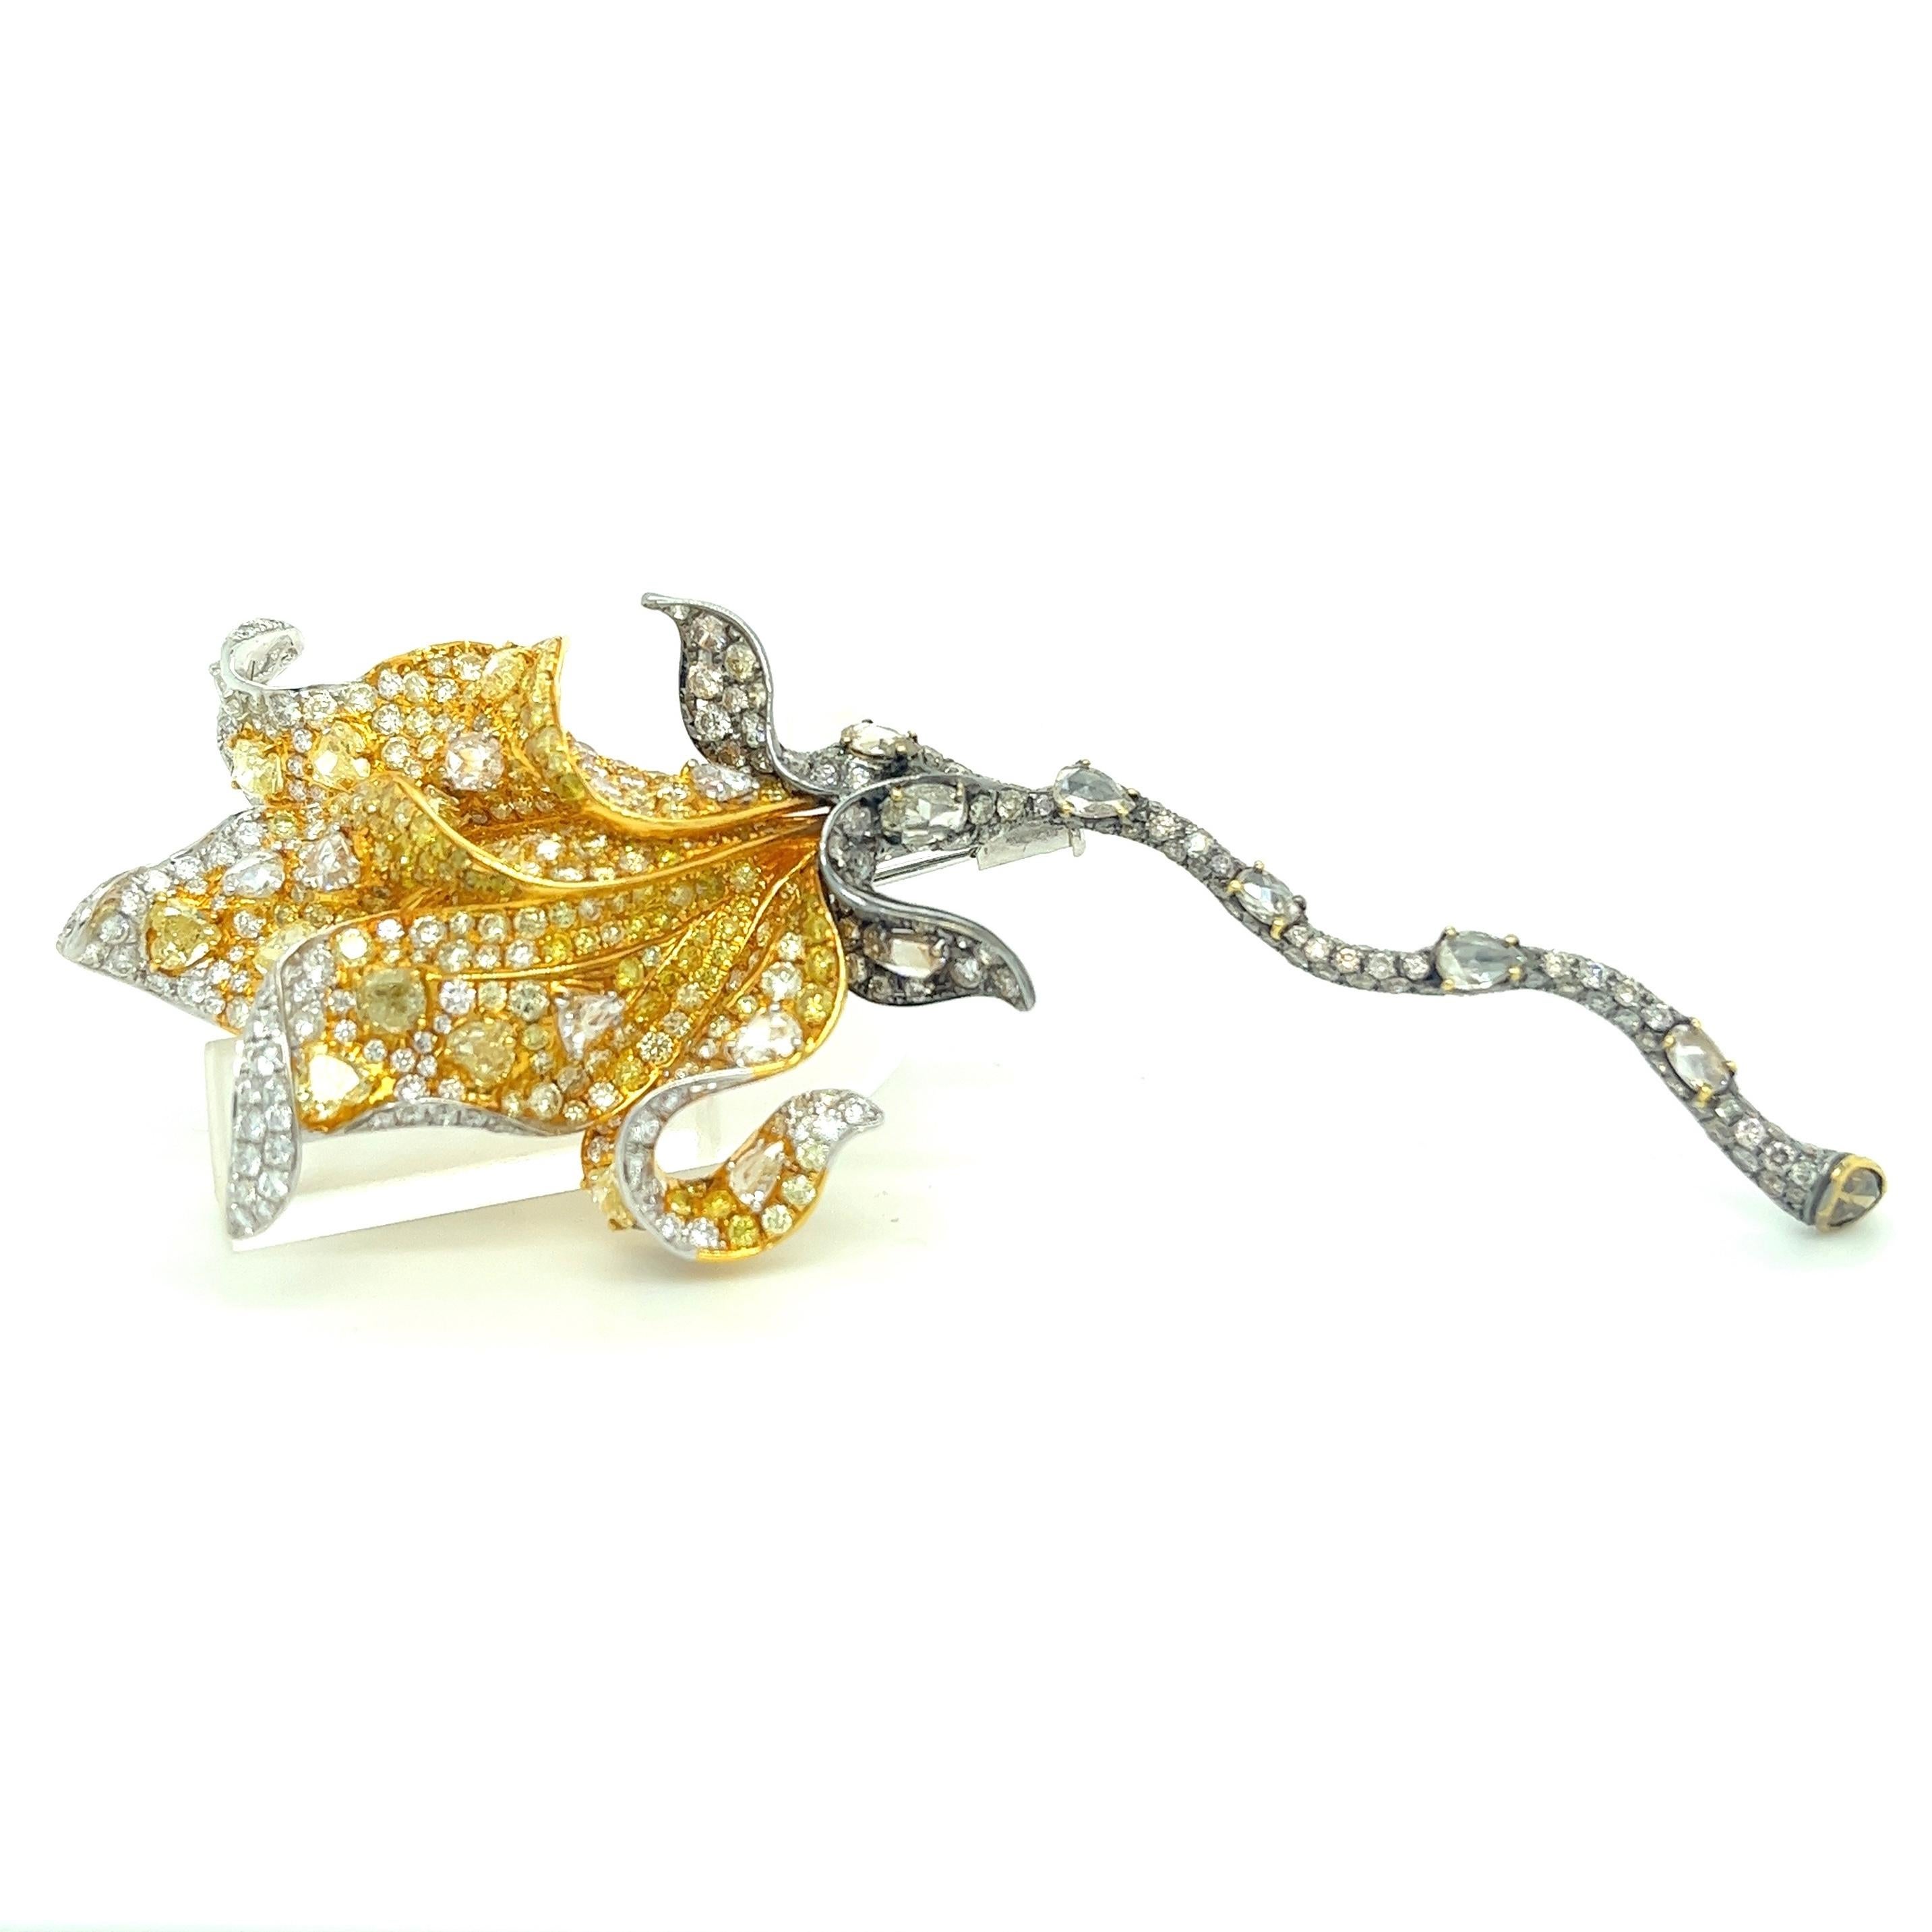 18K White Gold Flower Brooch with Diamonds & Fancy Diamonds

524 Diamonds & Fancy Diamonds - 12.41 CT
18K White Gold - 22.26 GM

This exquisite flower brooch features a unique design with black stems and yellow petals, creating a stunning contrast.